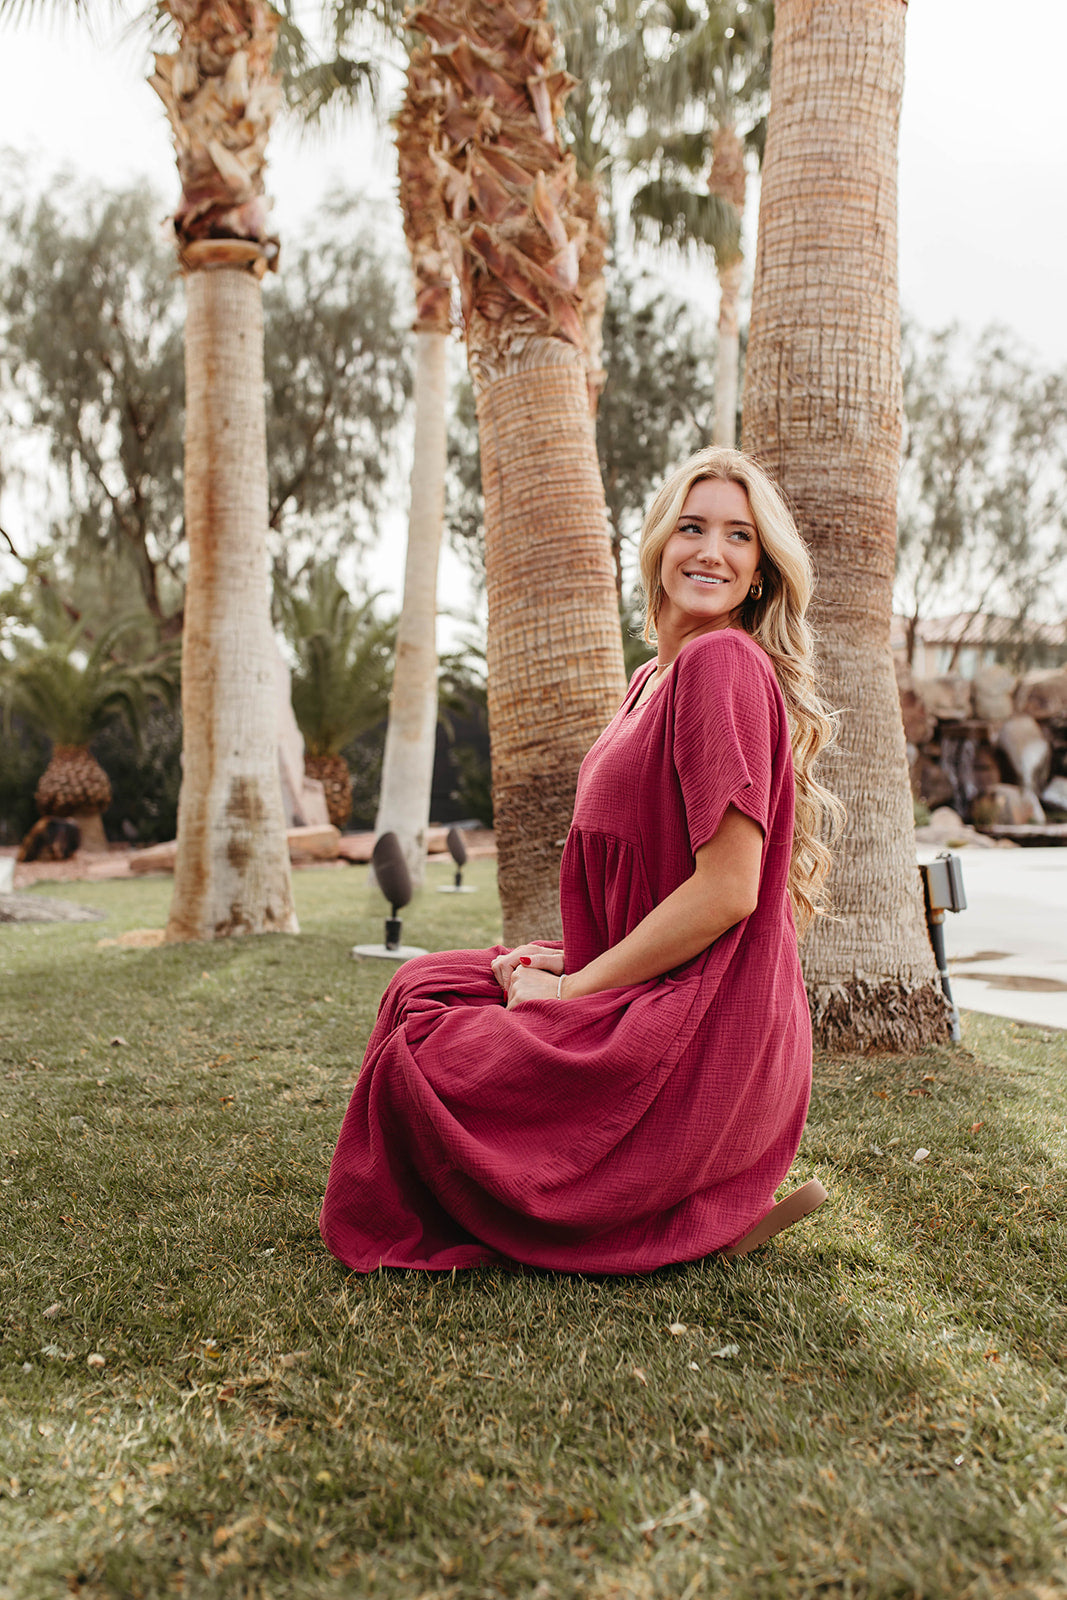 THE EASTON WASHED LINEN MAXI DRESS IN RED